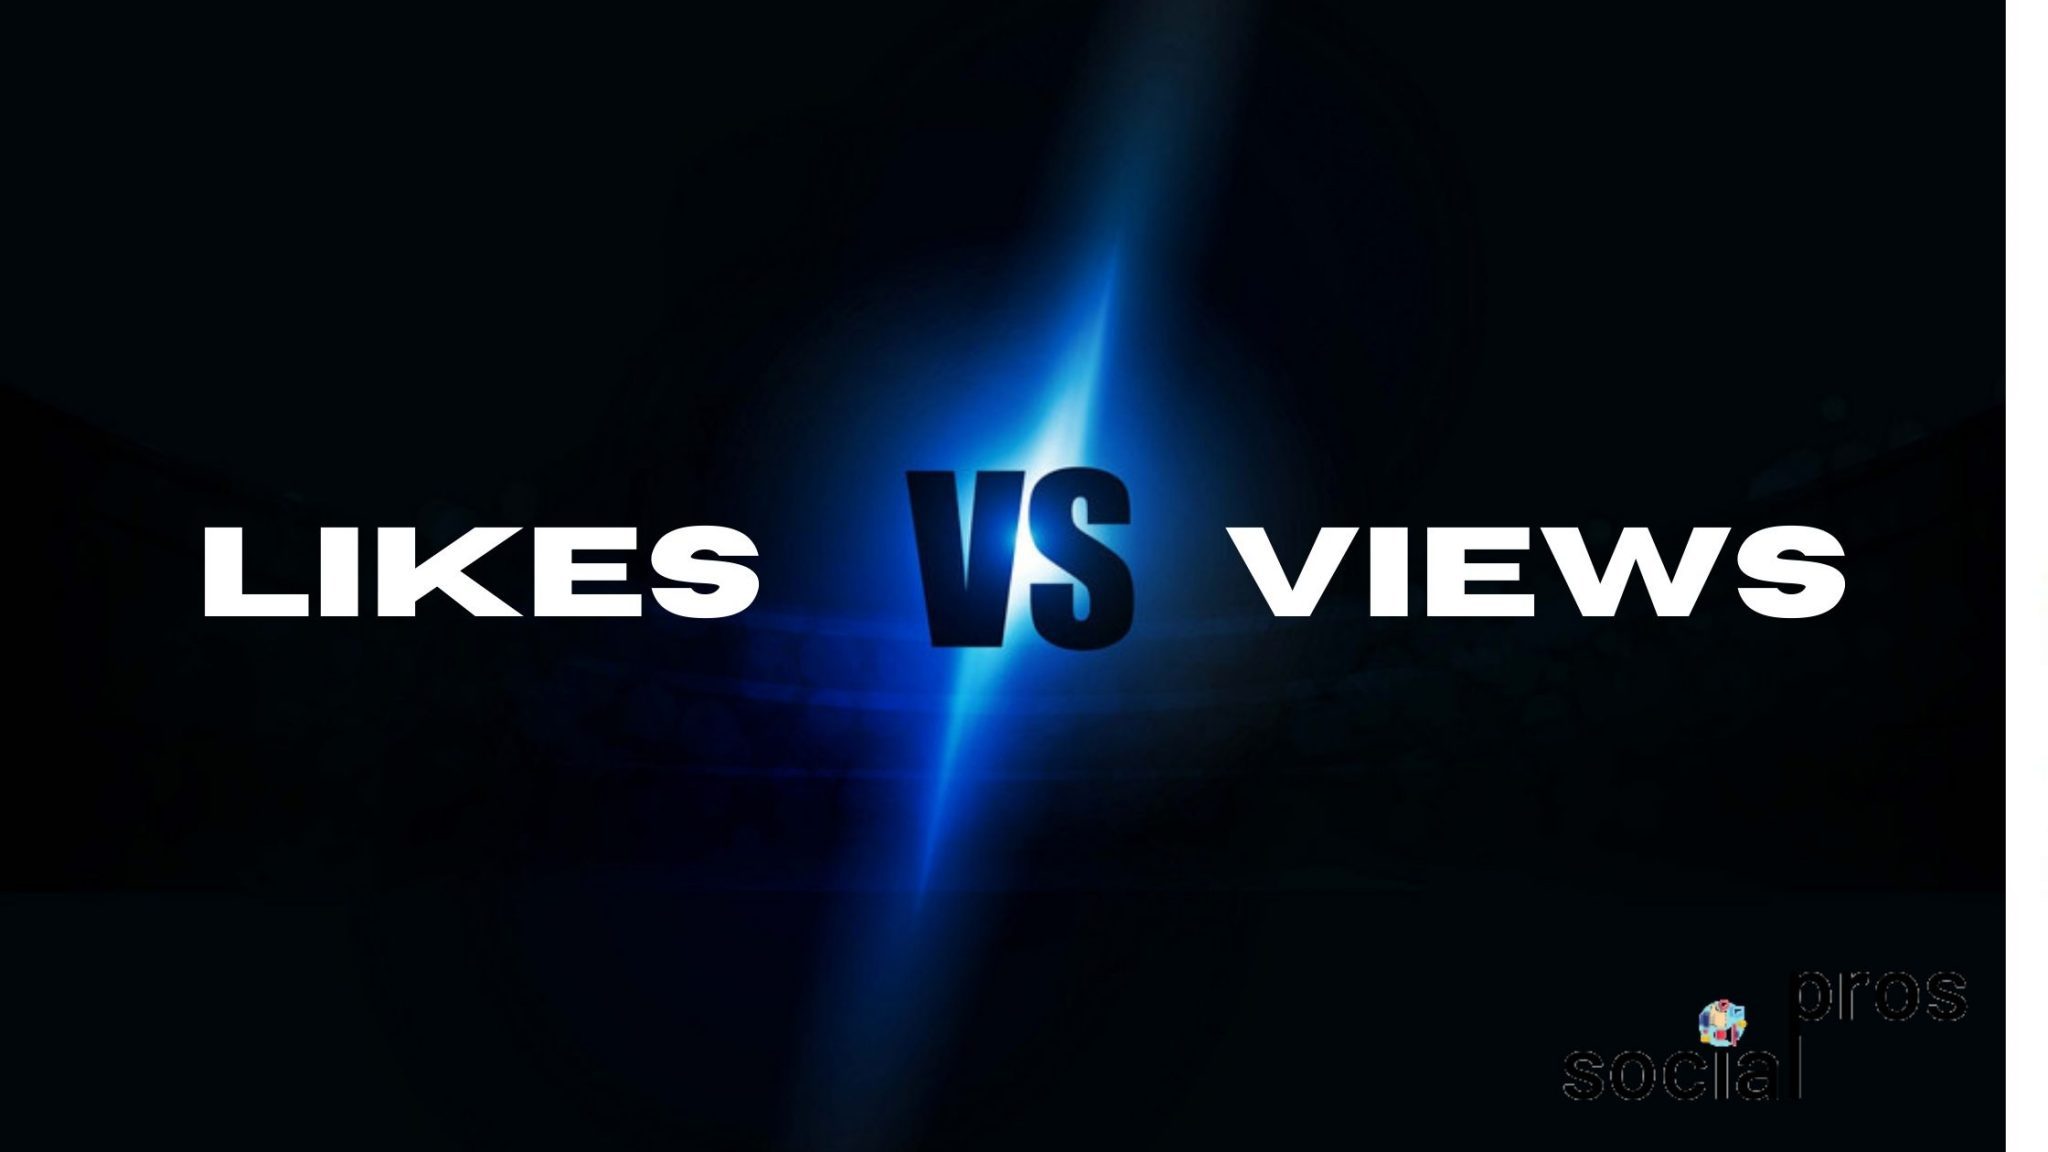 Photo includes Likes vs. Views text